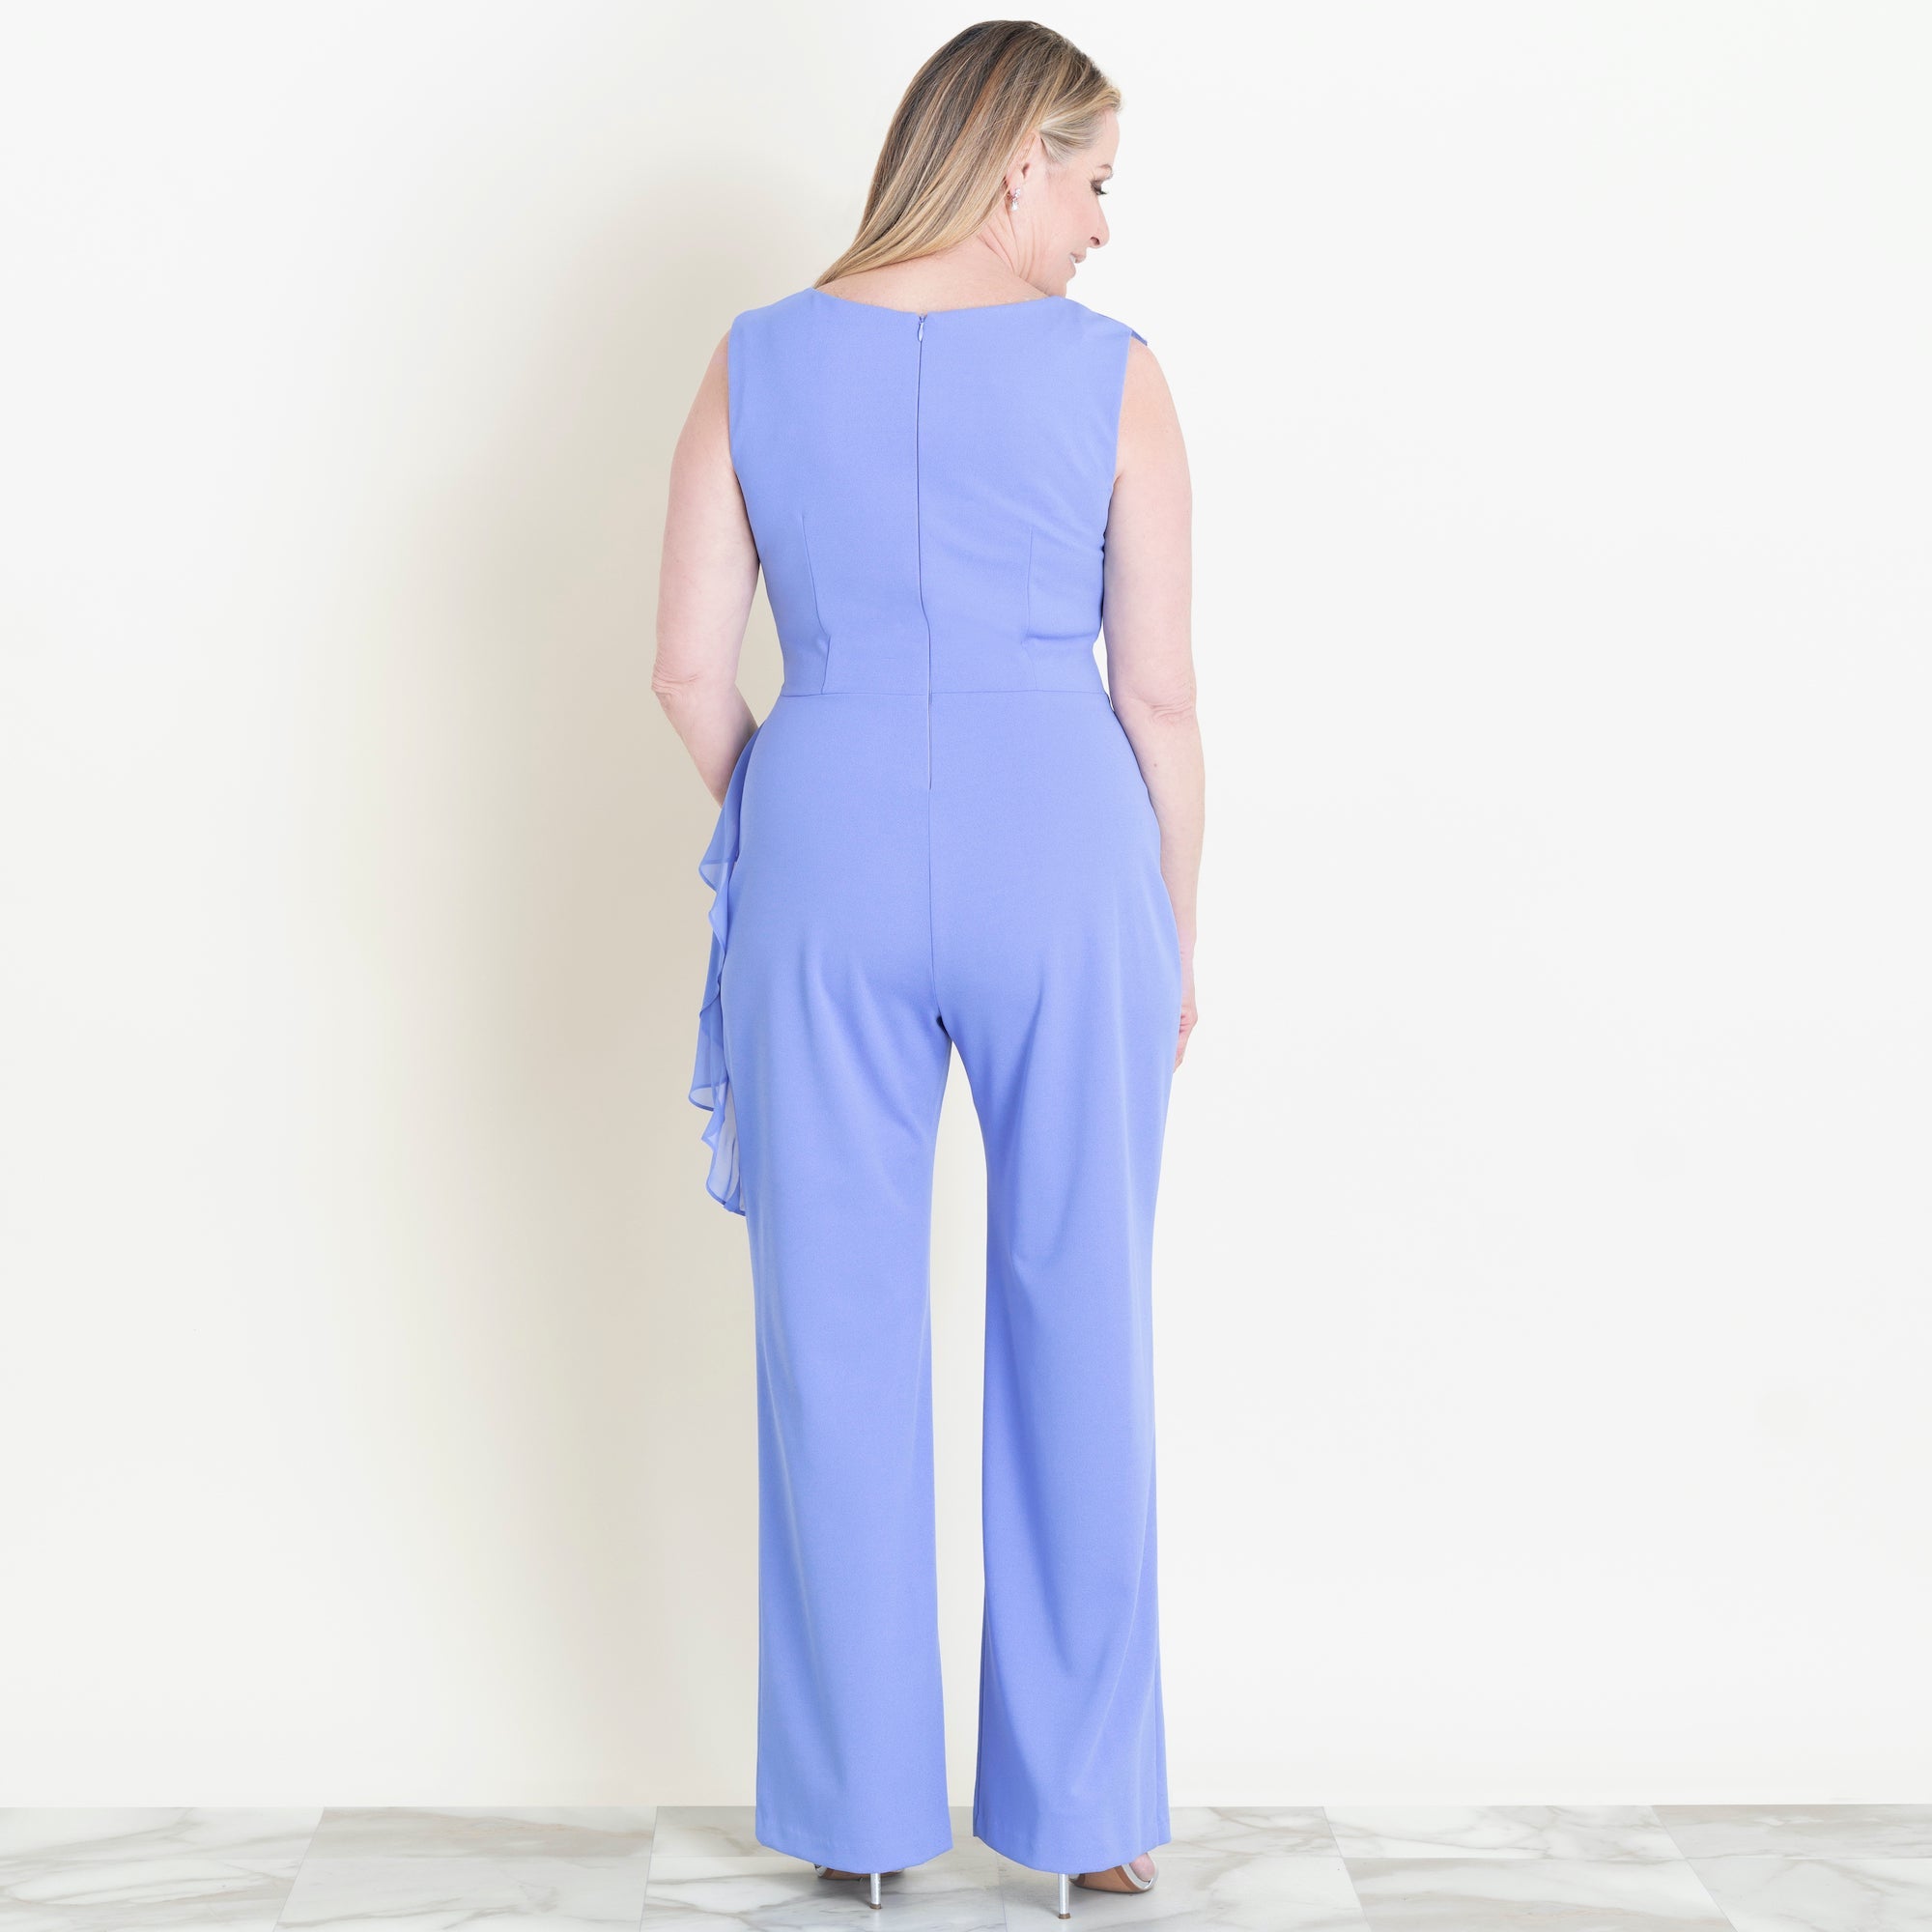 Woman posing wearing New Periwinkle Sara Periwinkle Jumpsuit from Connected Apparel